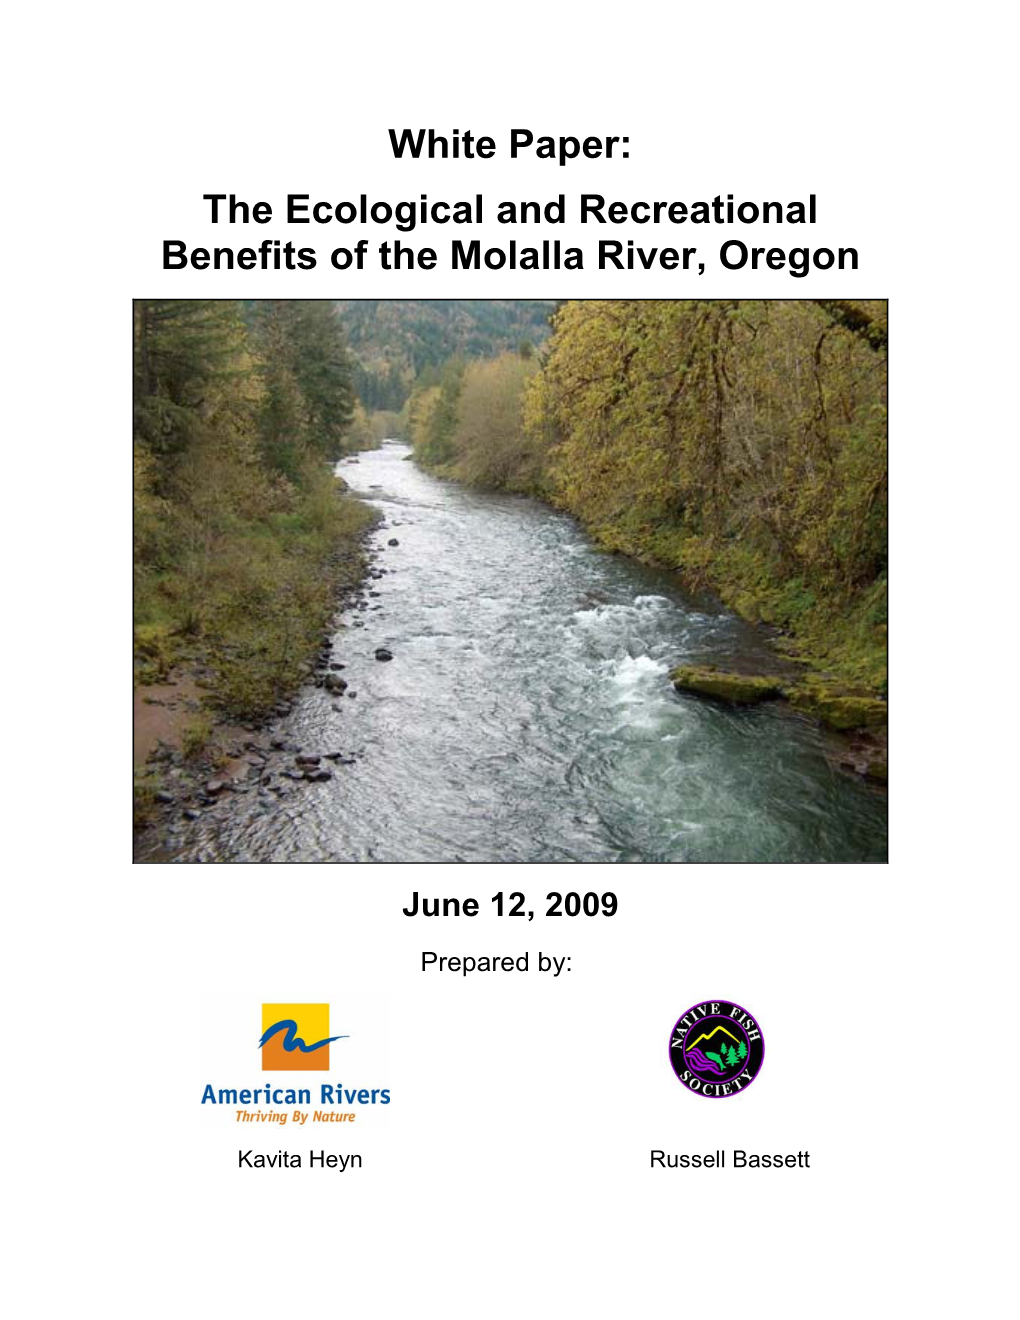 The Ecological and Recreational Benefits of the Molalla River, Oregon